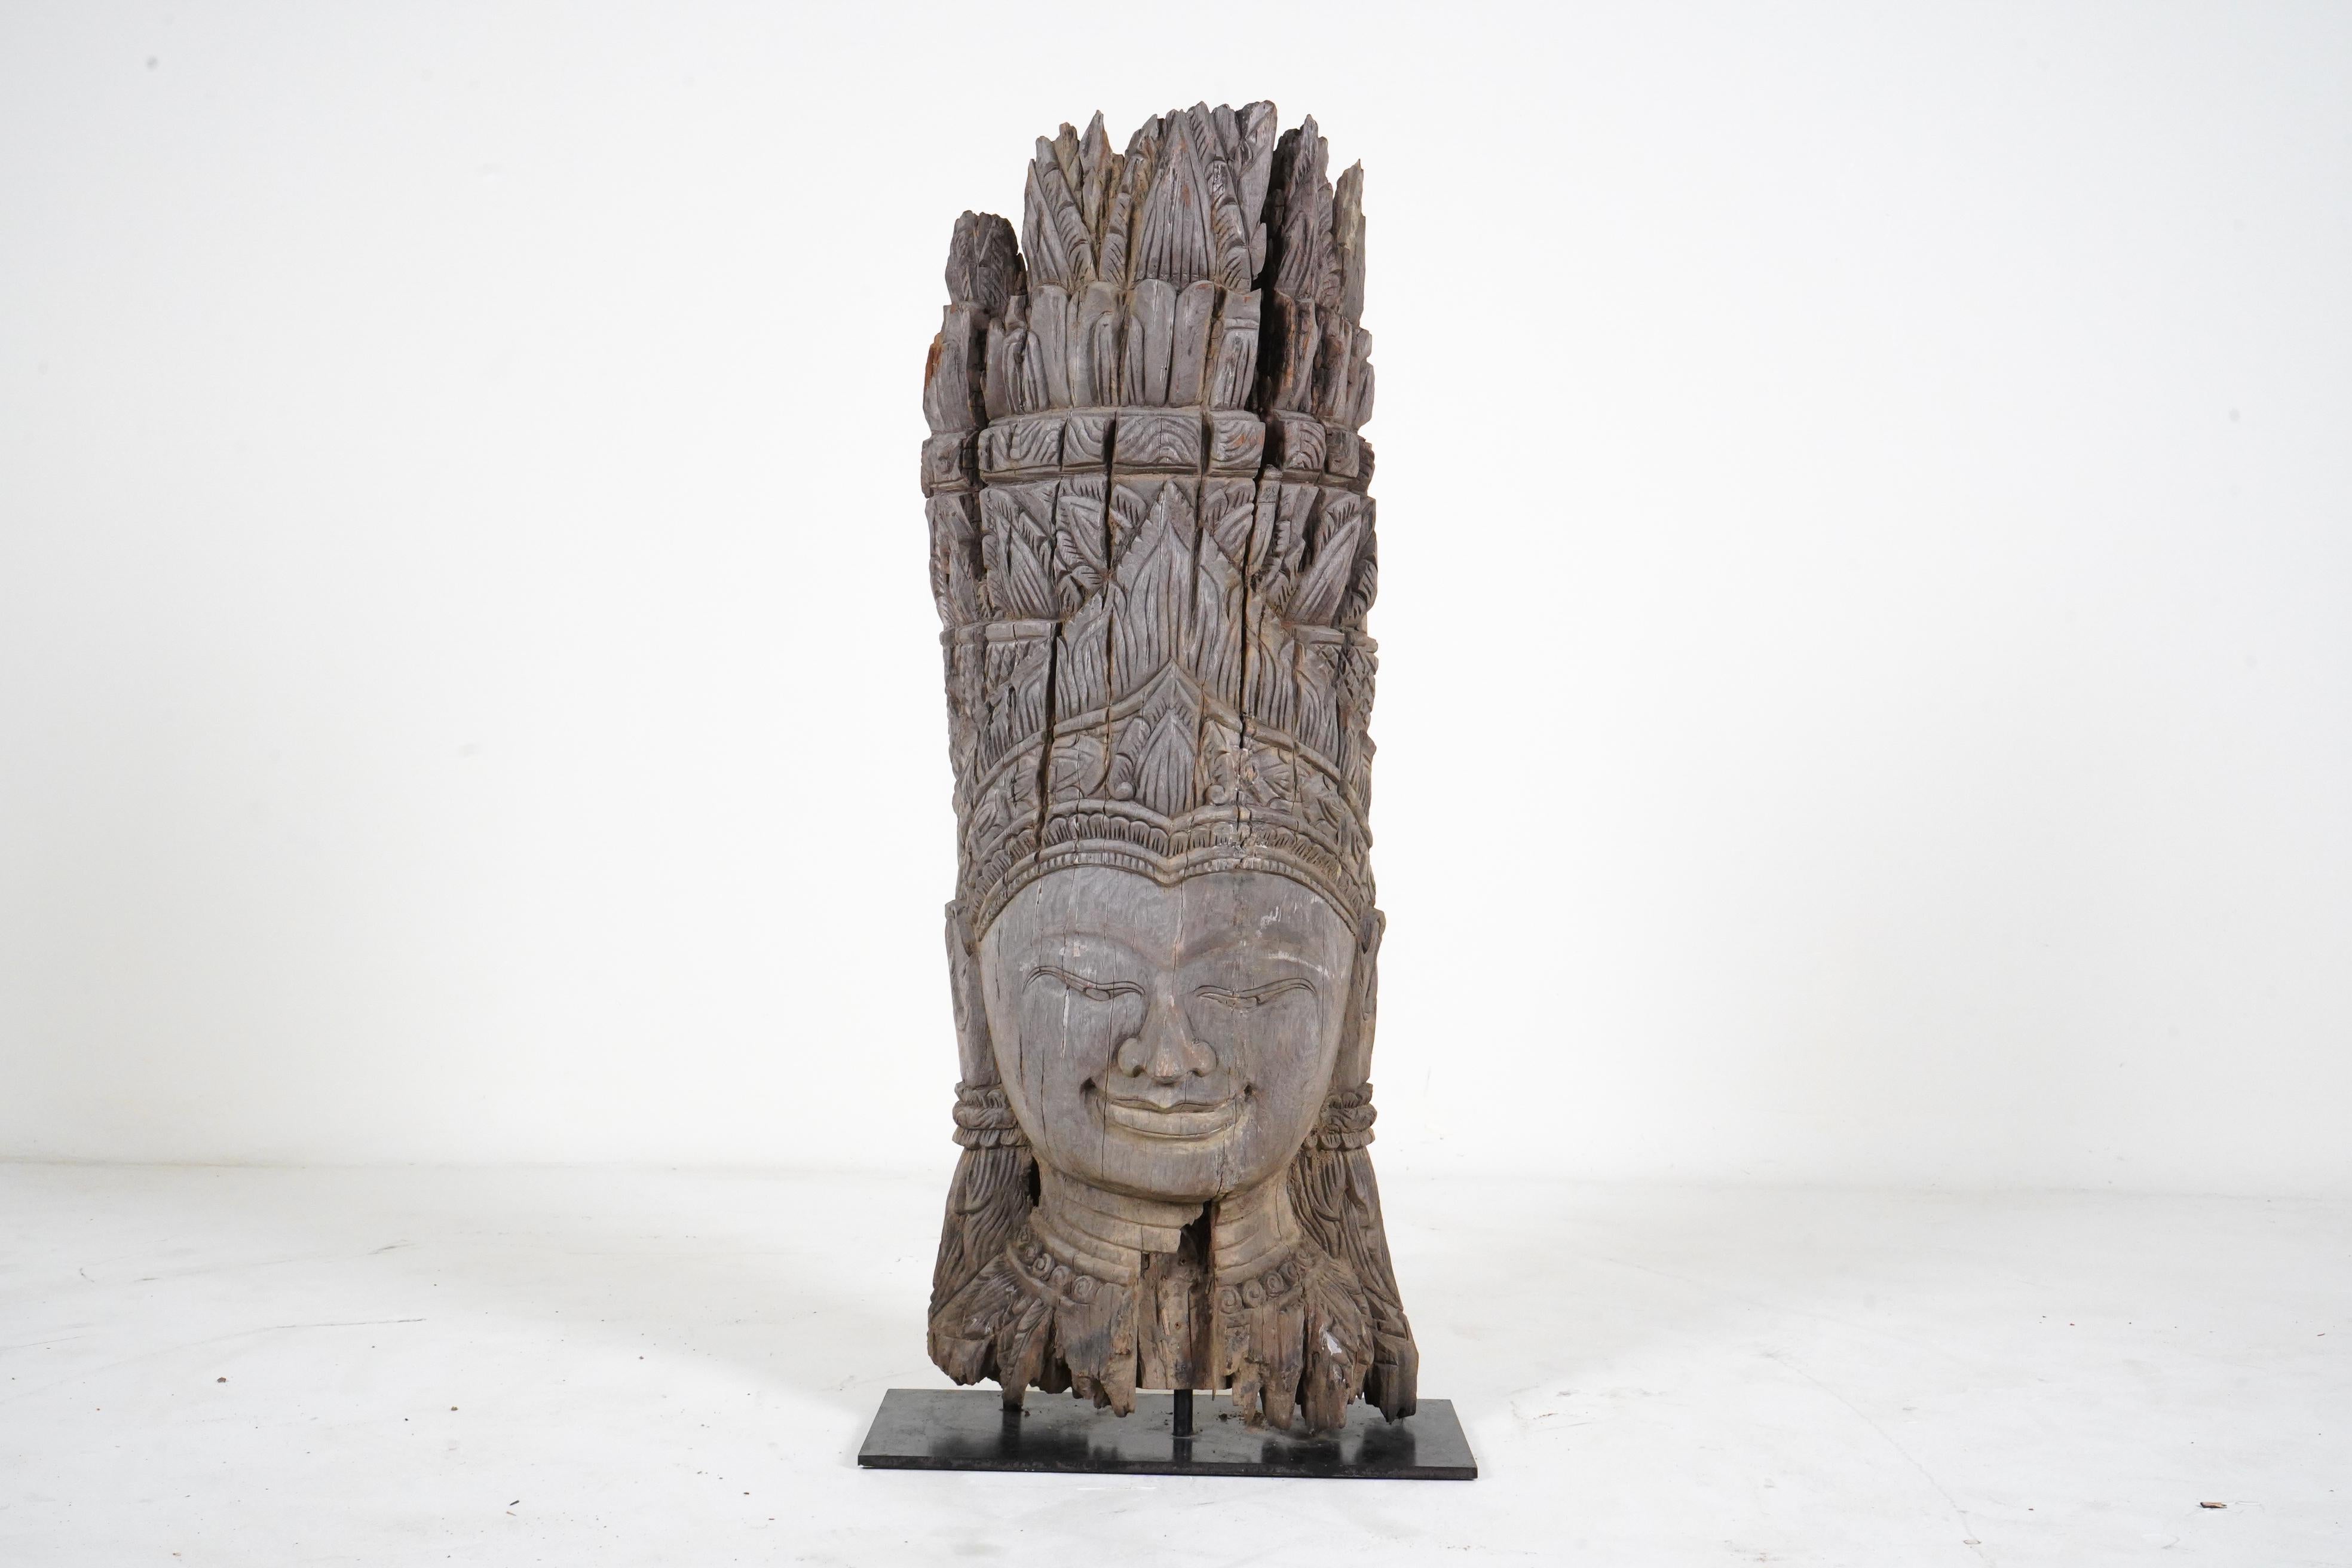 Newly carved from reclaimed teak, this large bust takes the form of an apsara. With origins in both Hindu and Buddhist mythology, Apsaras are female spirits of the clouds and waters. They are also referred to as 